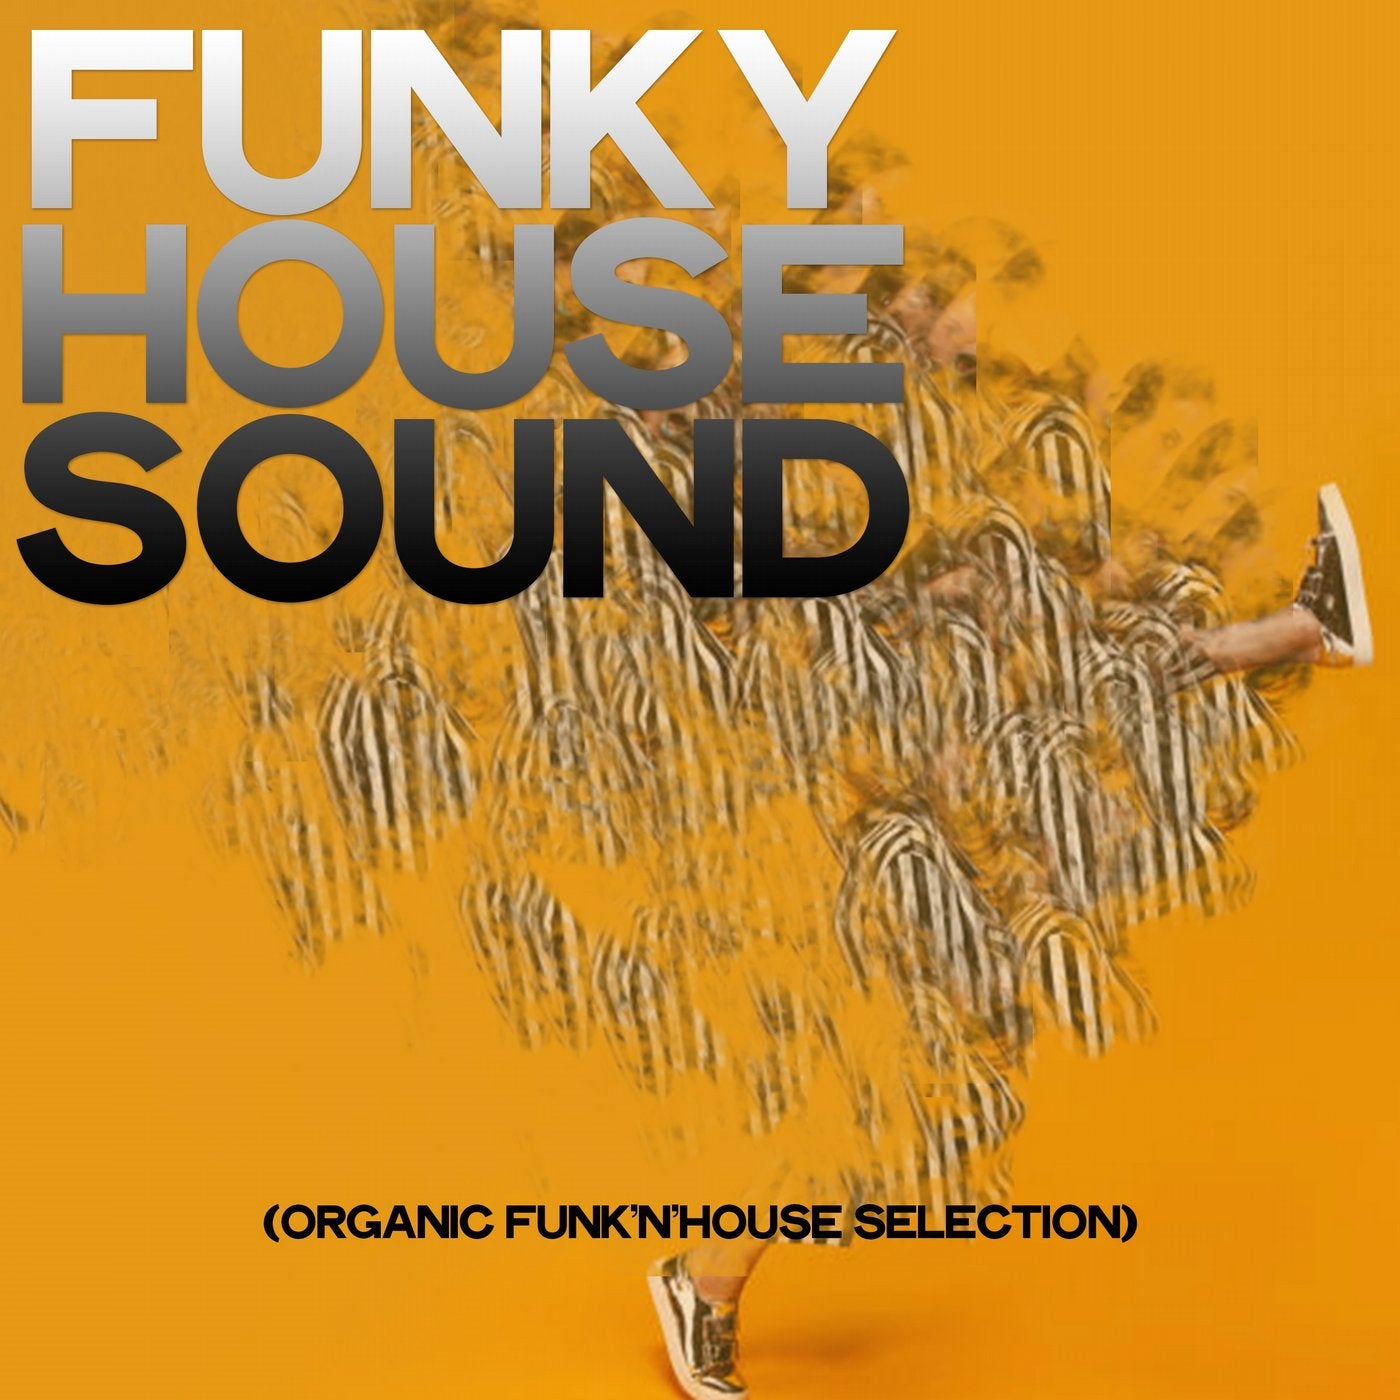 Funky House Sound (Organic Funk'n'house Selection)